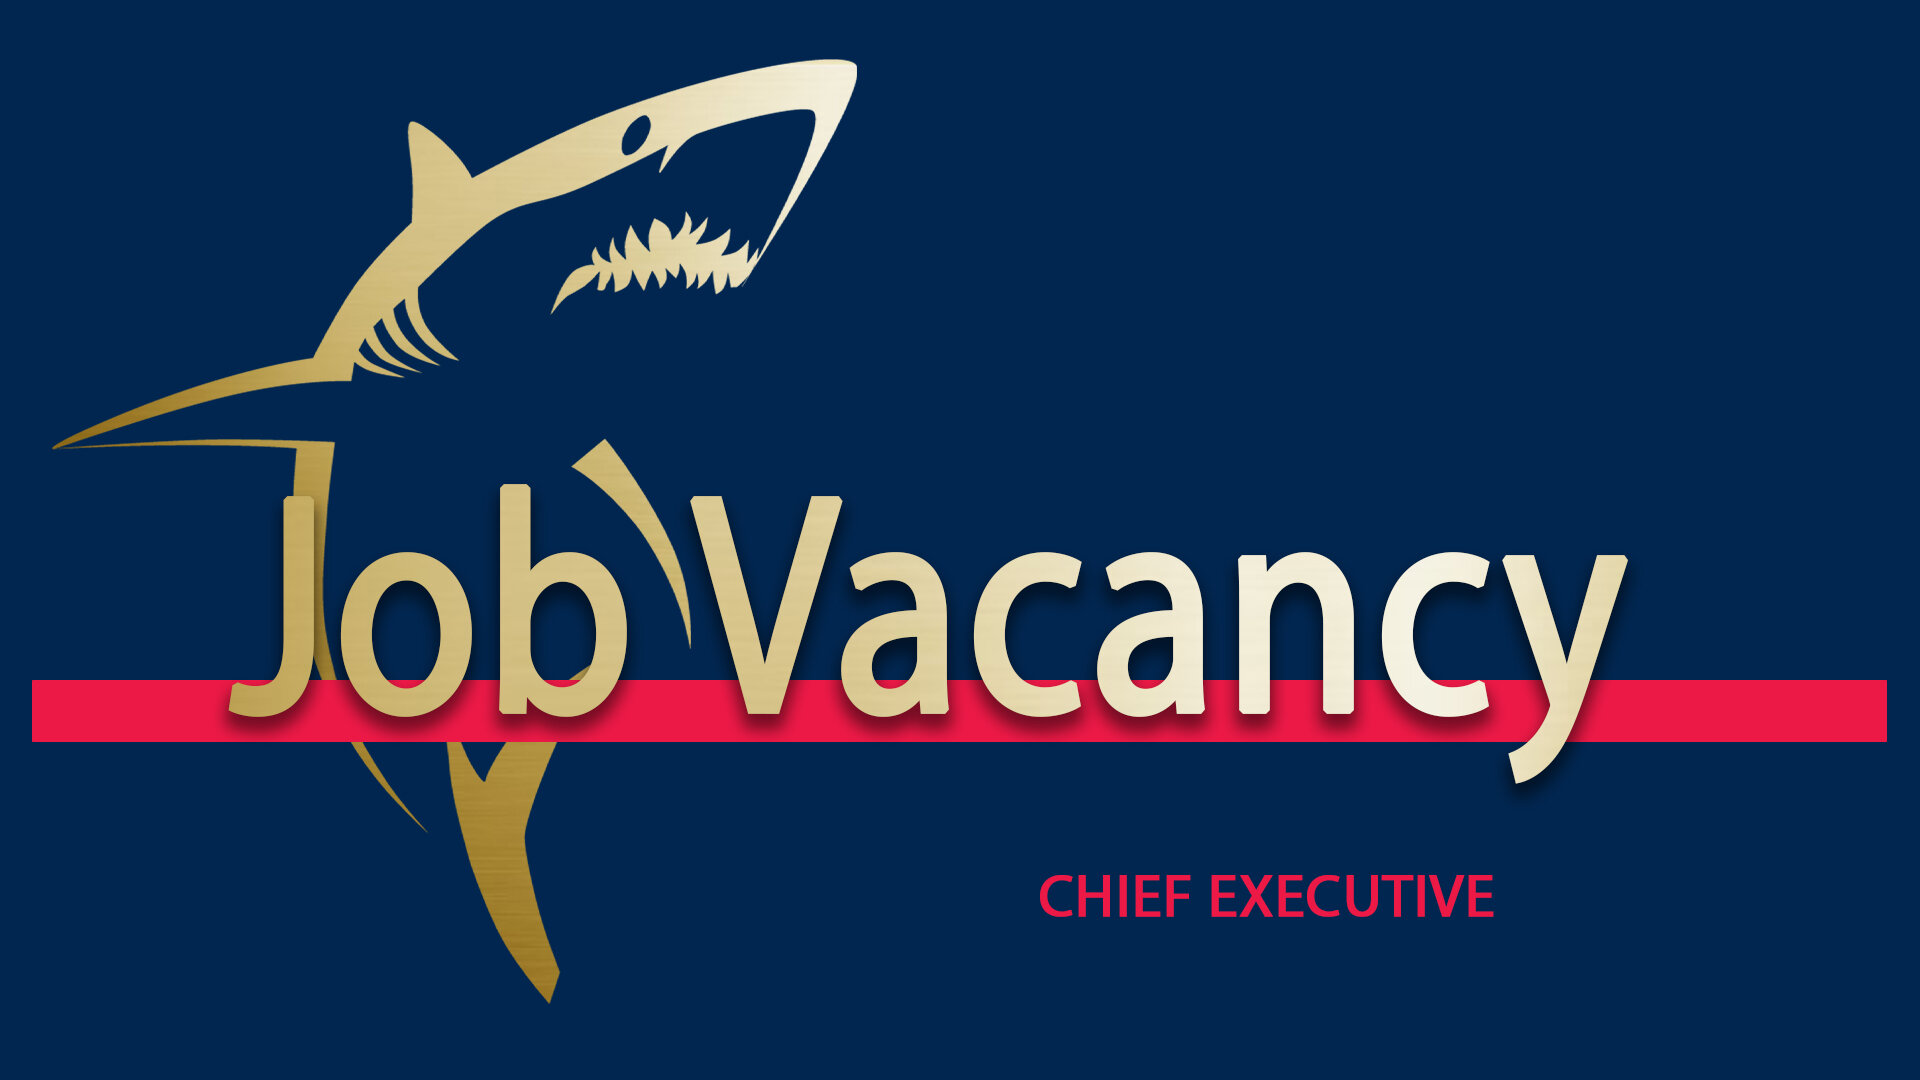 Keen to LEAD our Team??🦈🦈

Chief Executive 🏉🦈

Please click on the links below👇
CLICK HERE:
https://intepeople.my.salesforce-sites.com/jobs/jobDetail_s?id=a06GB00001nbVeKYAU&amp;location=&amp;keywords=&amp;cp=1

https://www.seek.co.nz/job/737752